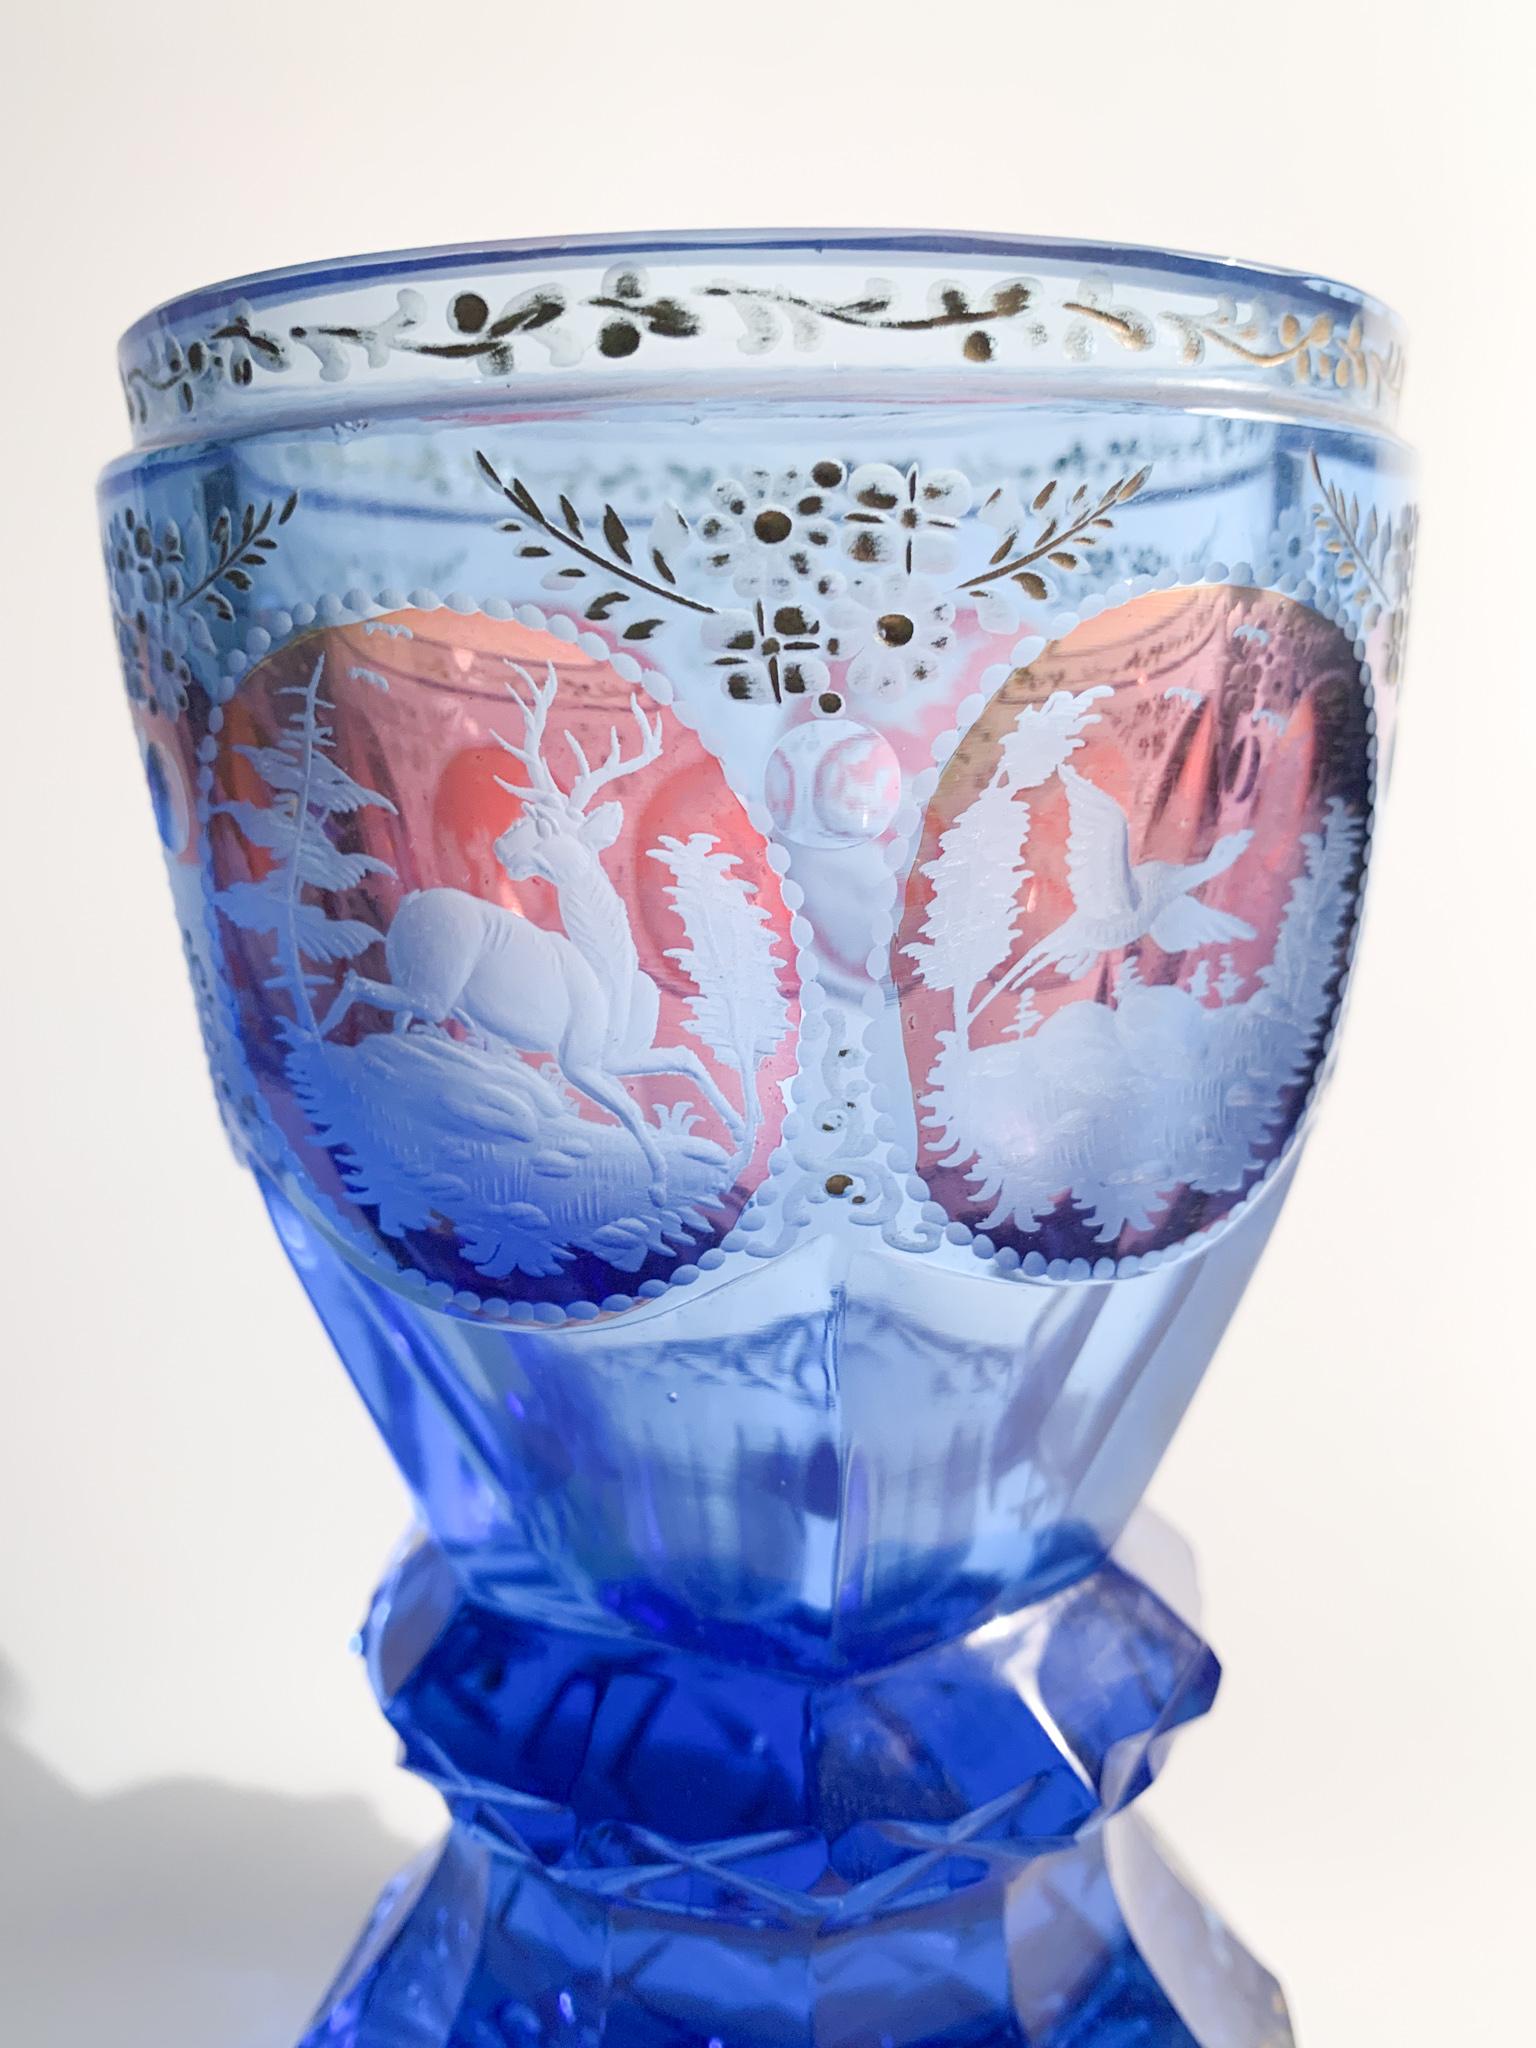 German Blue Biedermeier Crystal Glass with Acid Decorations from the 1800s